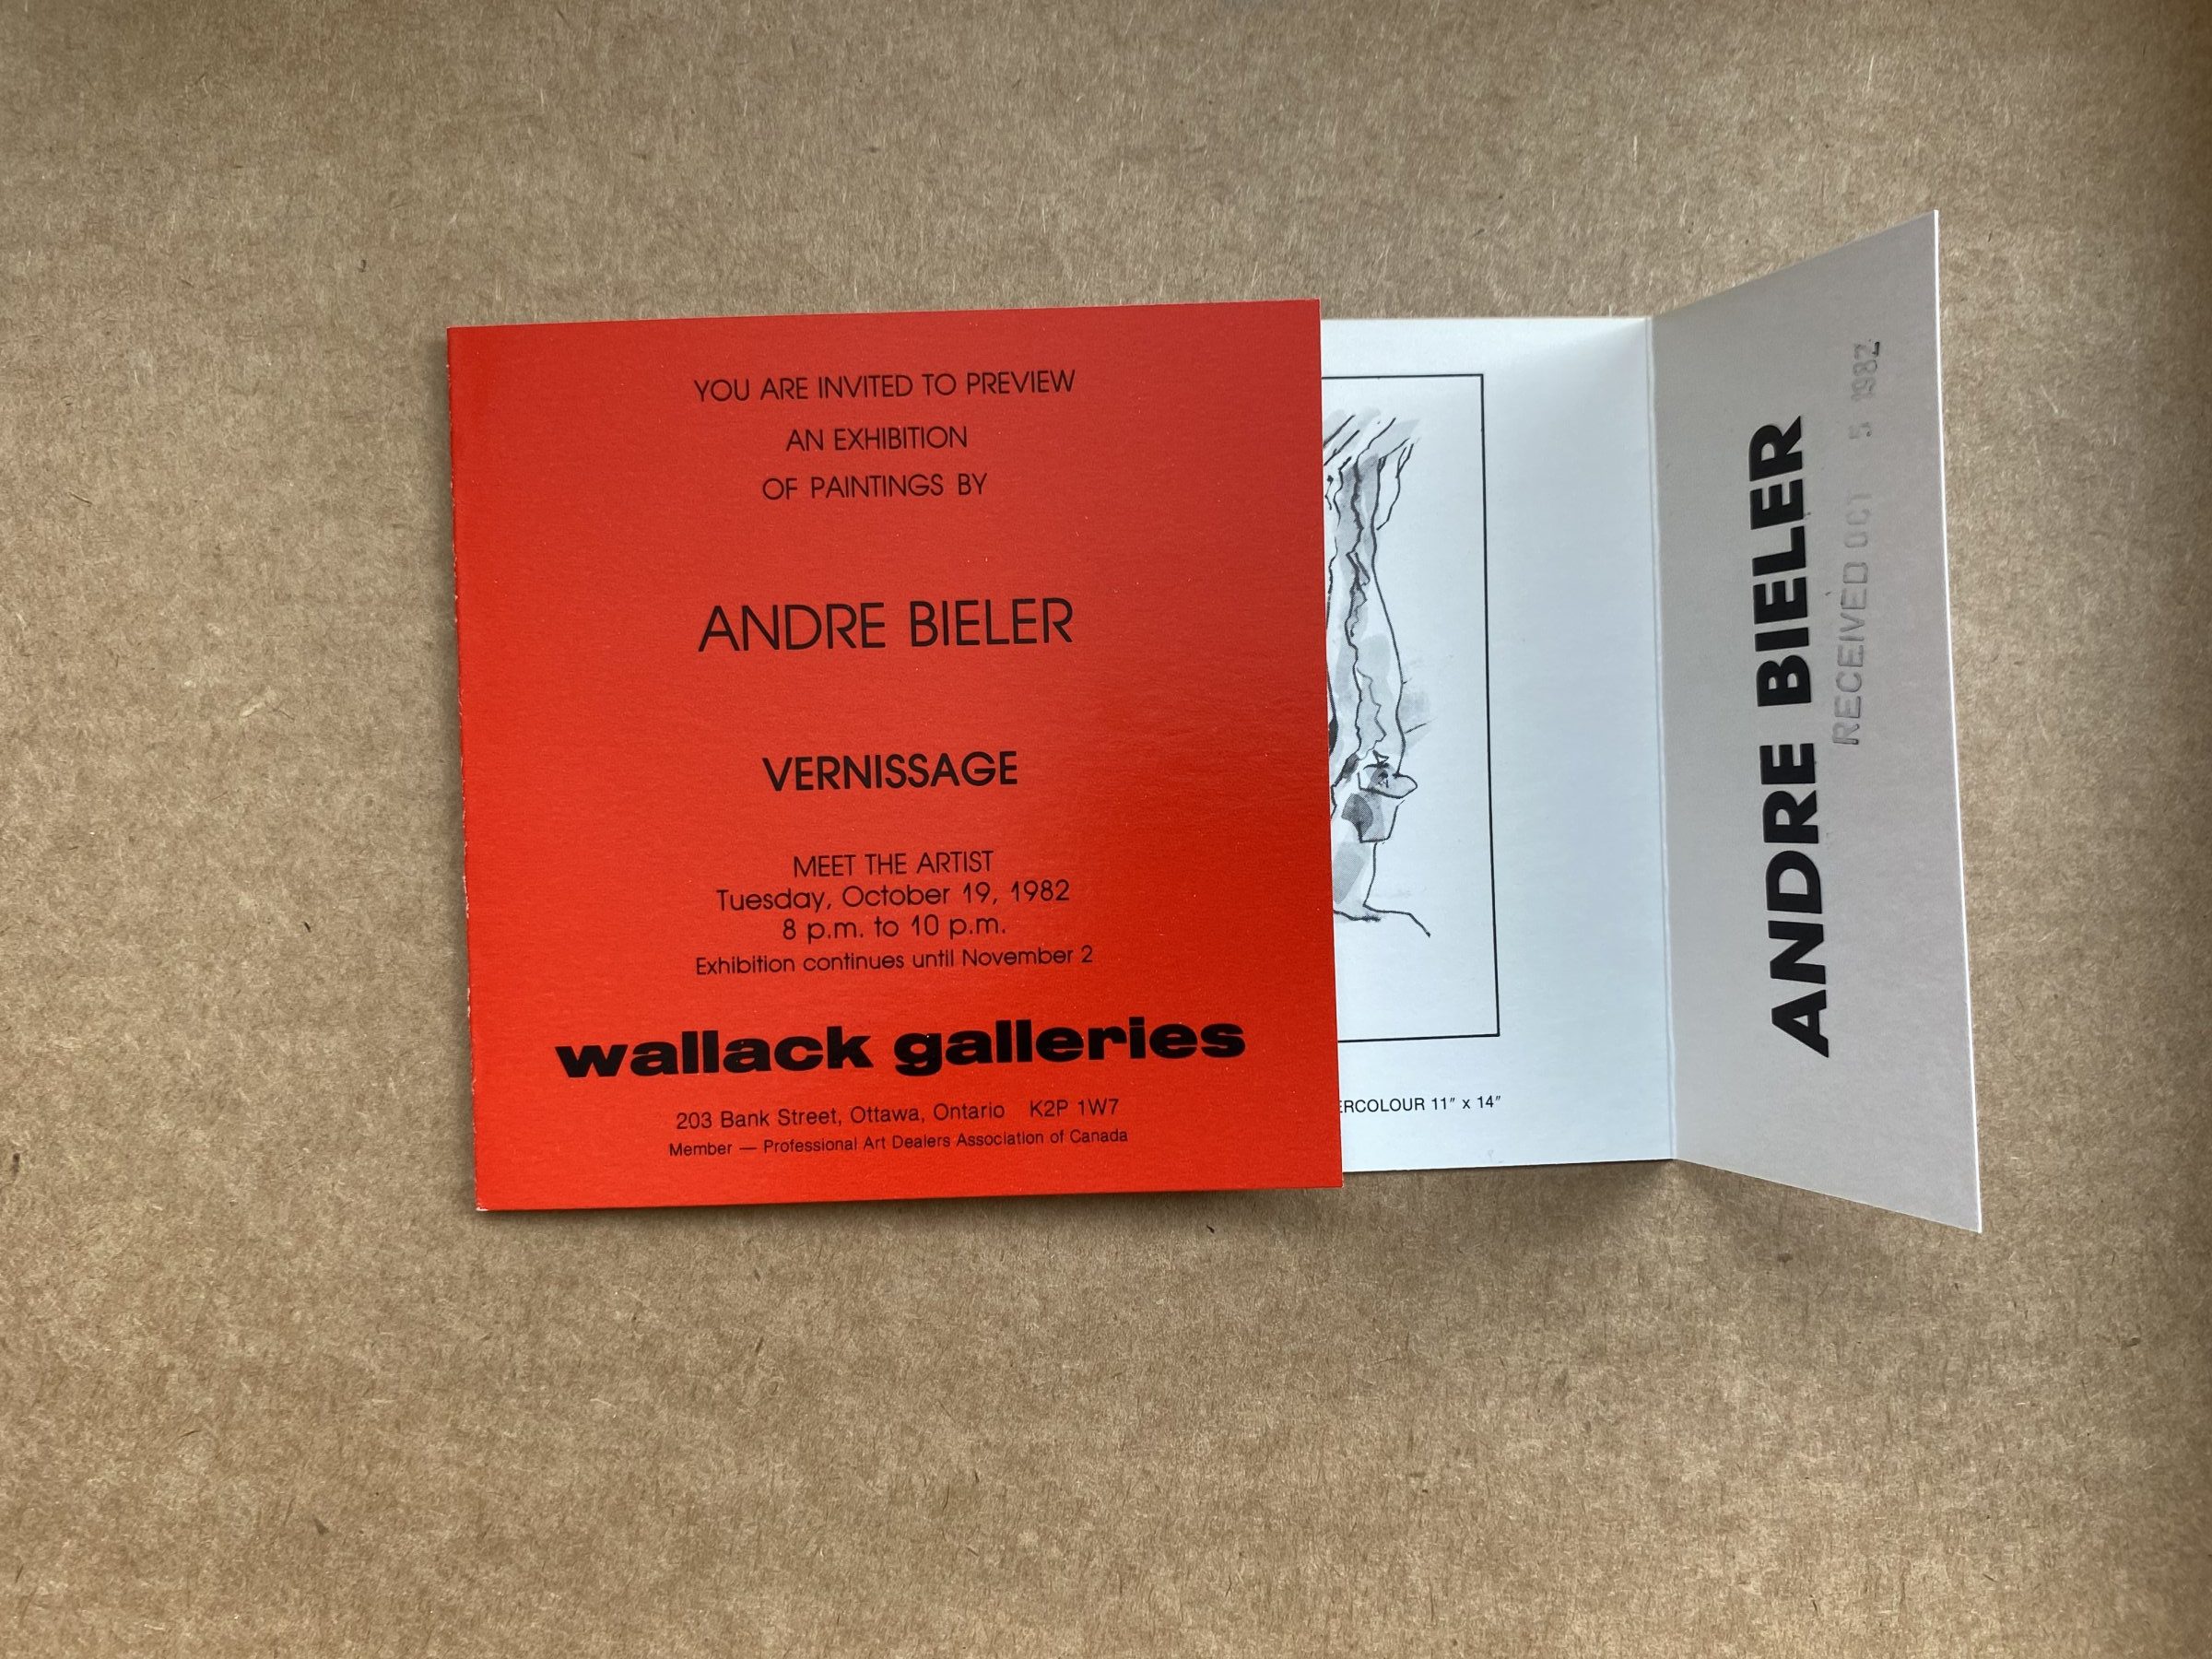 Invitation to the preview of an André Biéler exhibition at Wallack Galleries, Ottawa.